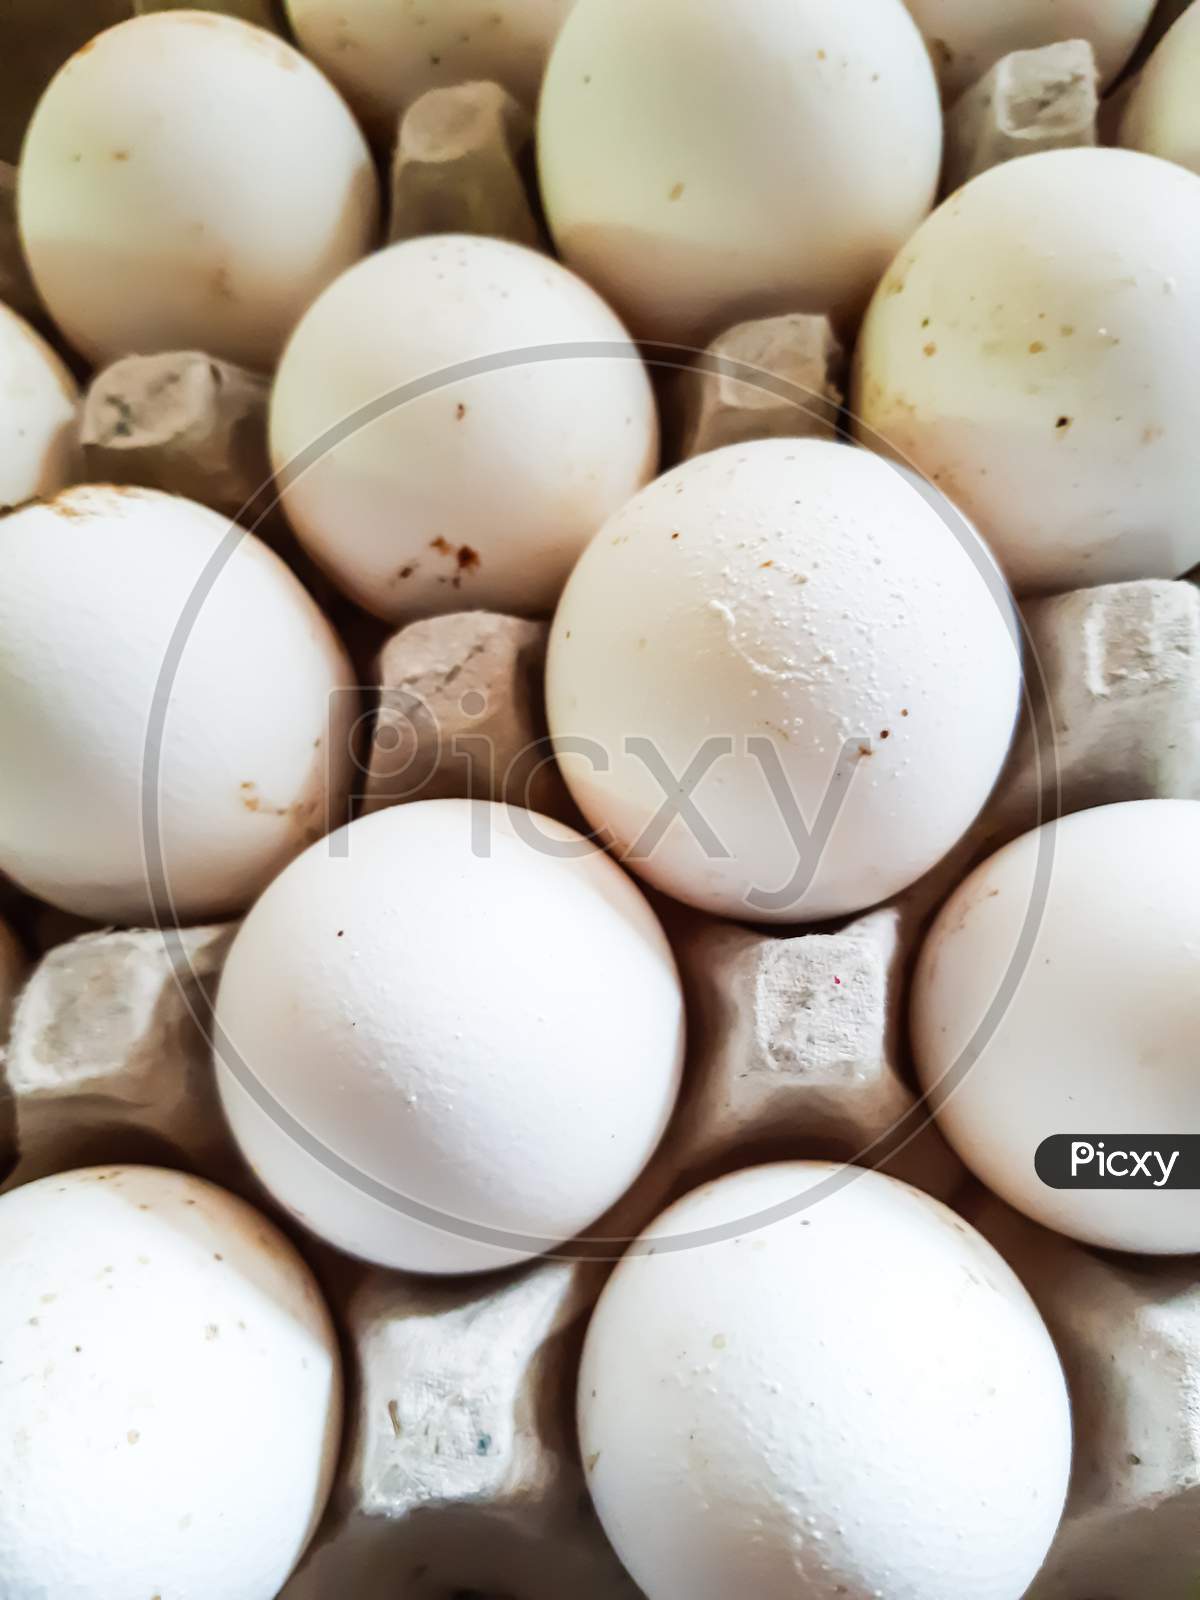 It Contains White Chicken Egg Trays. Eggs Contain A Lot Of Protein Which Is Very Beneficial For The Human Body.